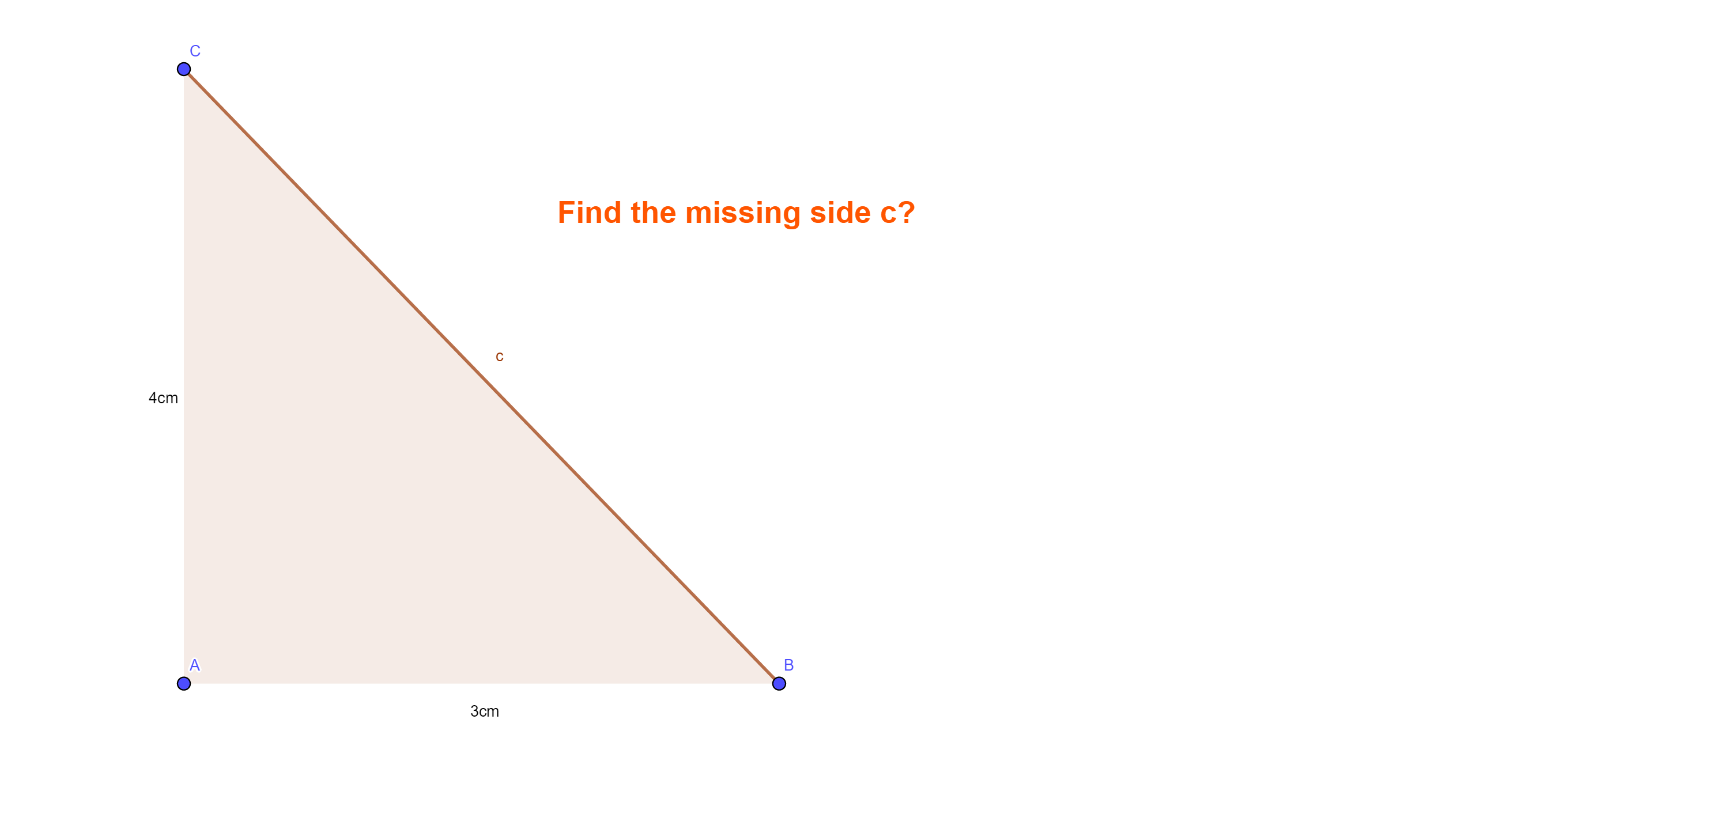 Question: Find the missing side c in the triangle below?